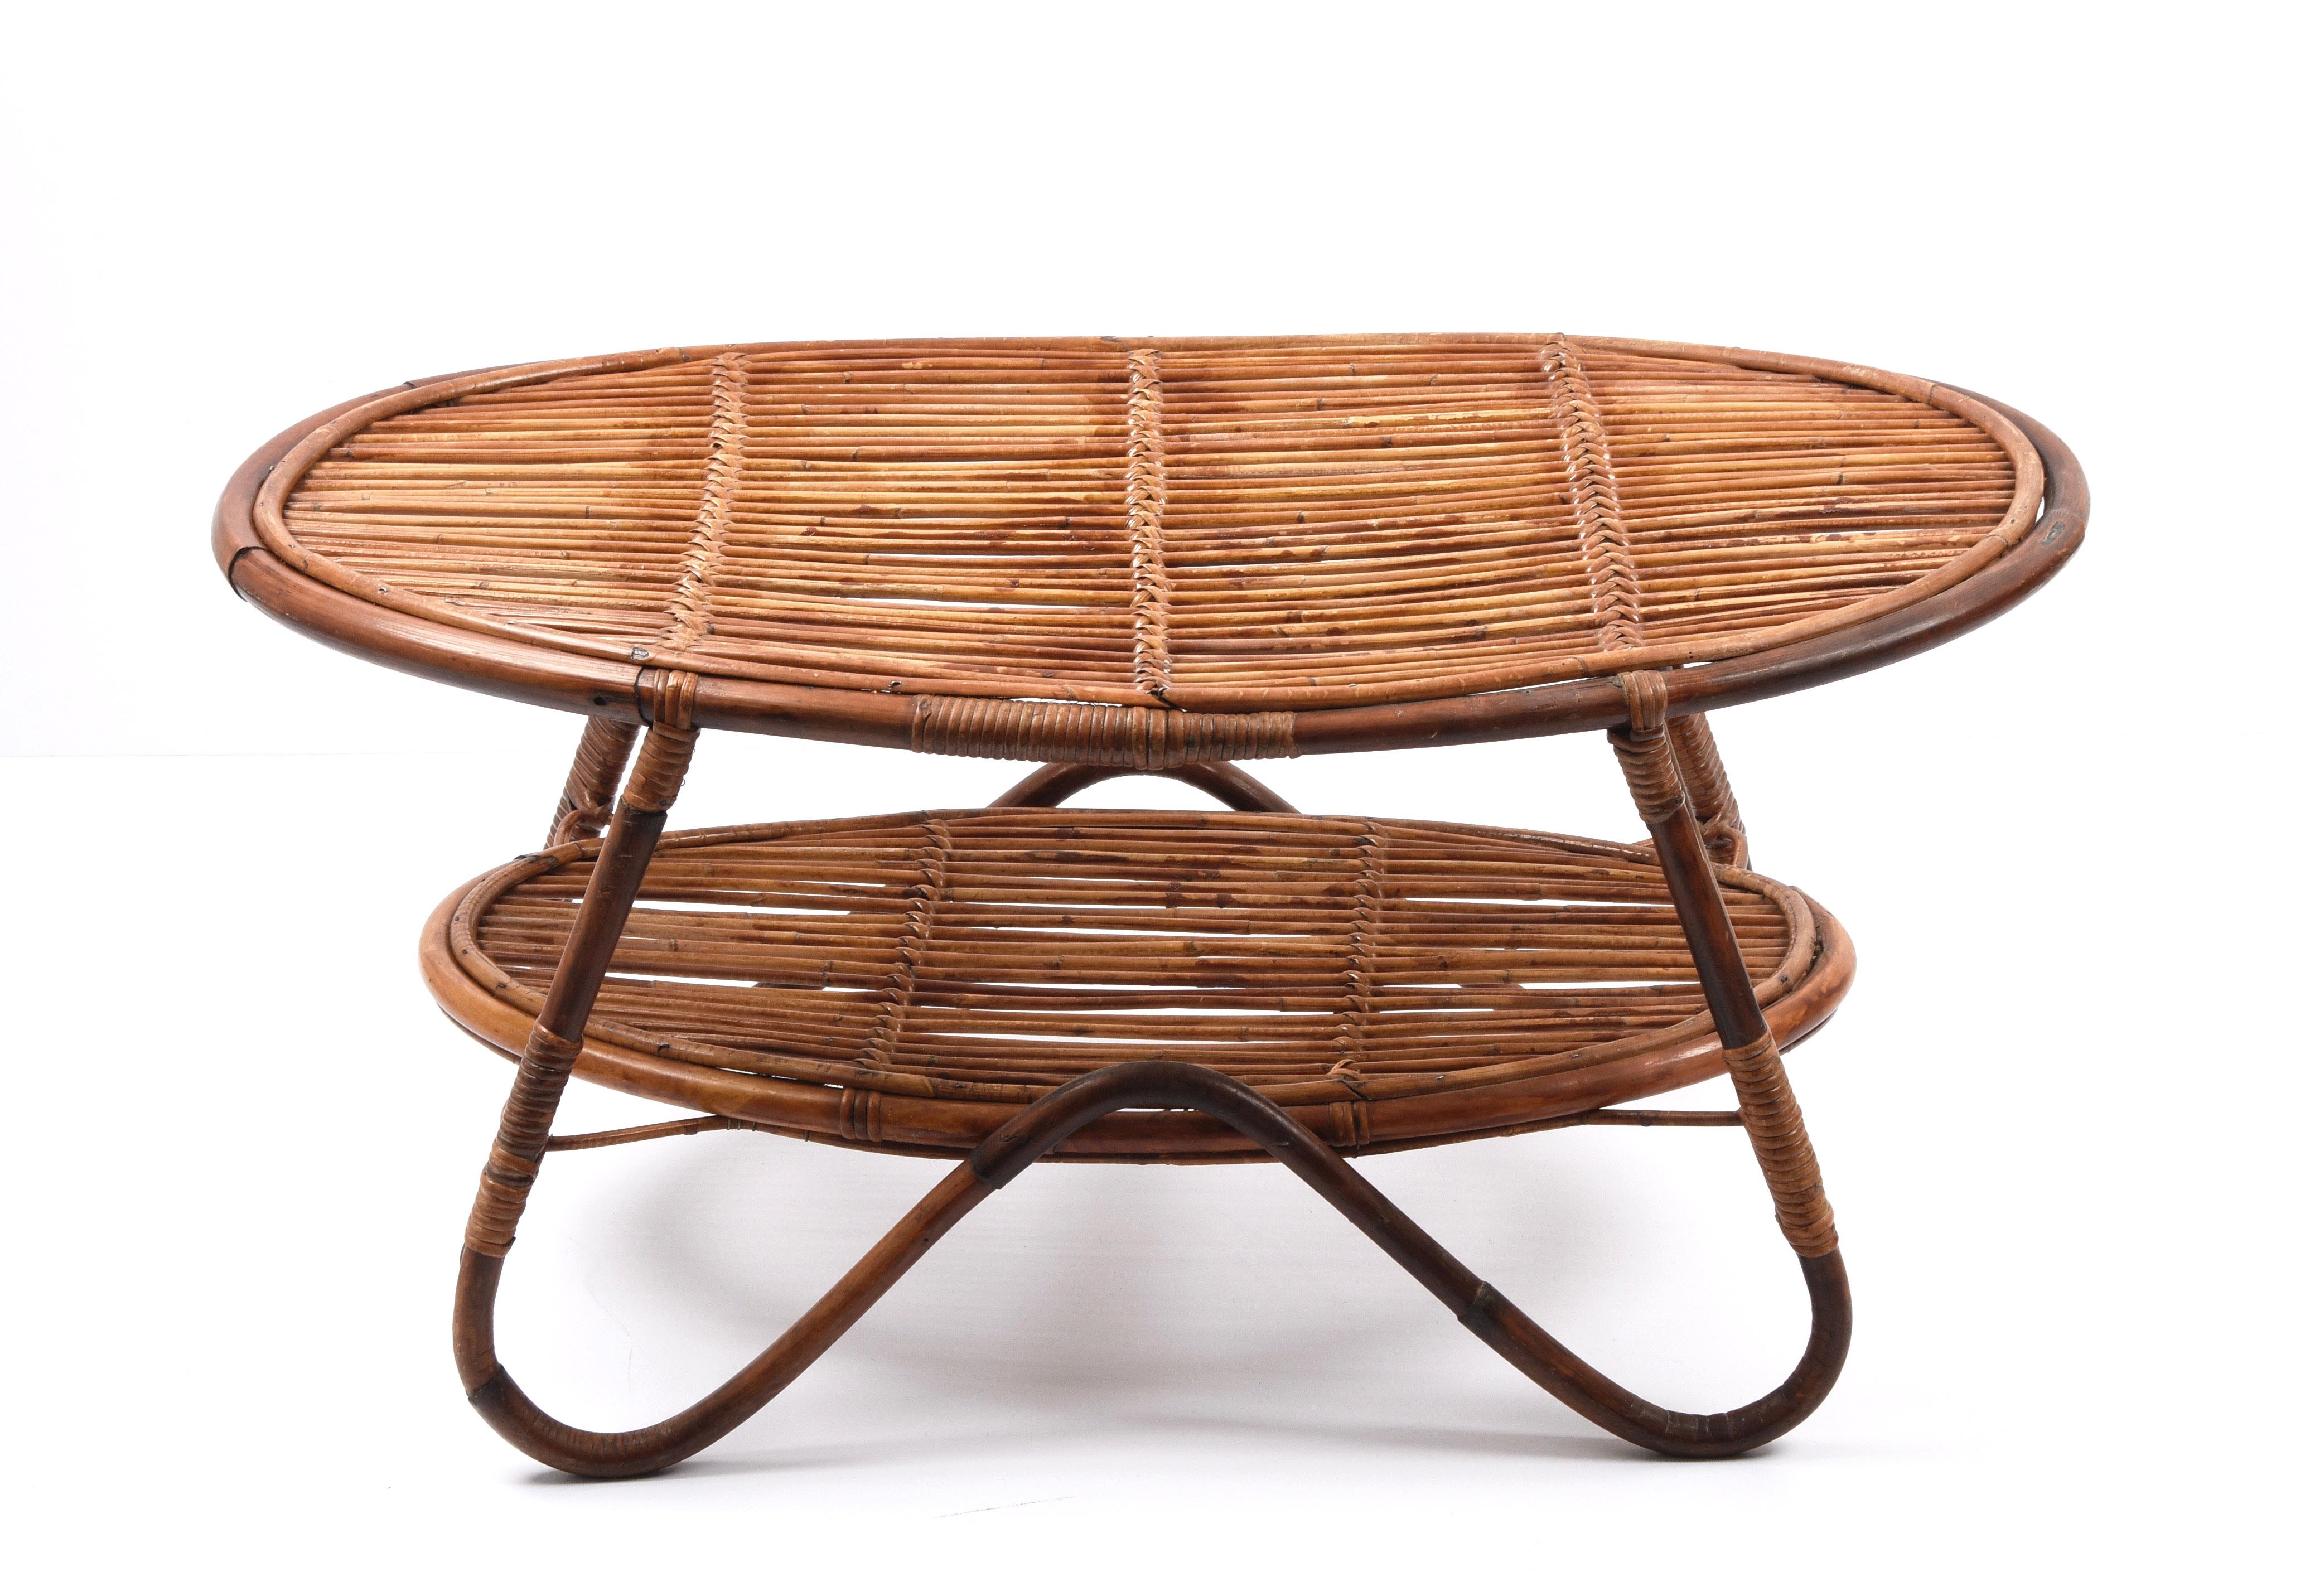 Midcentury Italian Oval Rattan and Bamboo Two Levels Coffee Table, 1950s For Sale 5